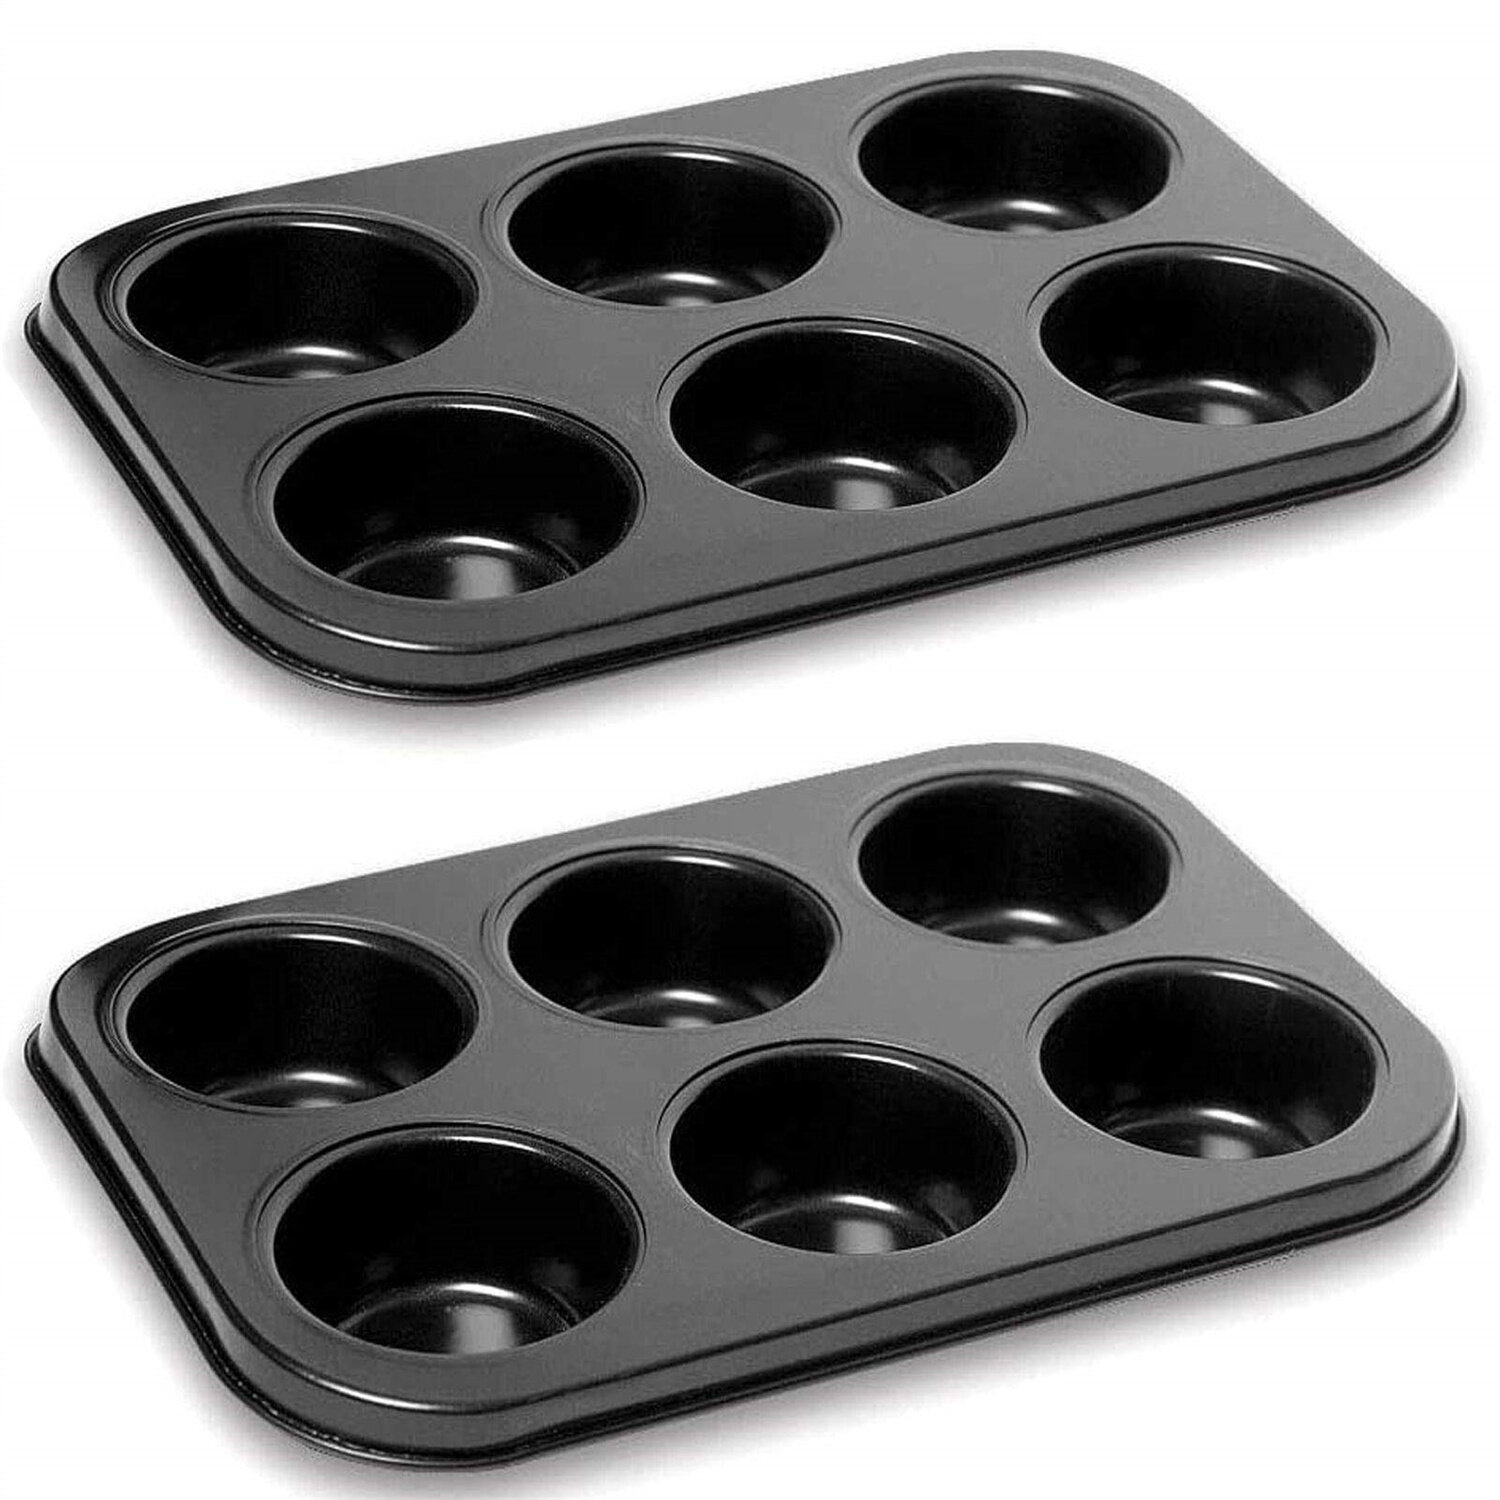 6 Cup Muffin Cooking Pan Heavyweight Steel Bakeware Baking Muffins & Cupcakes